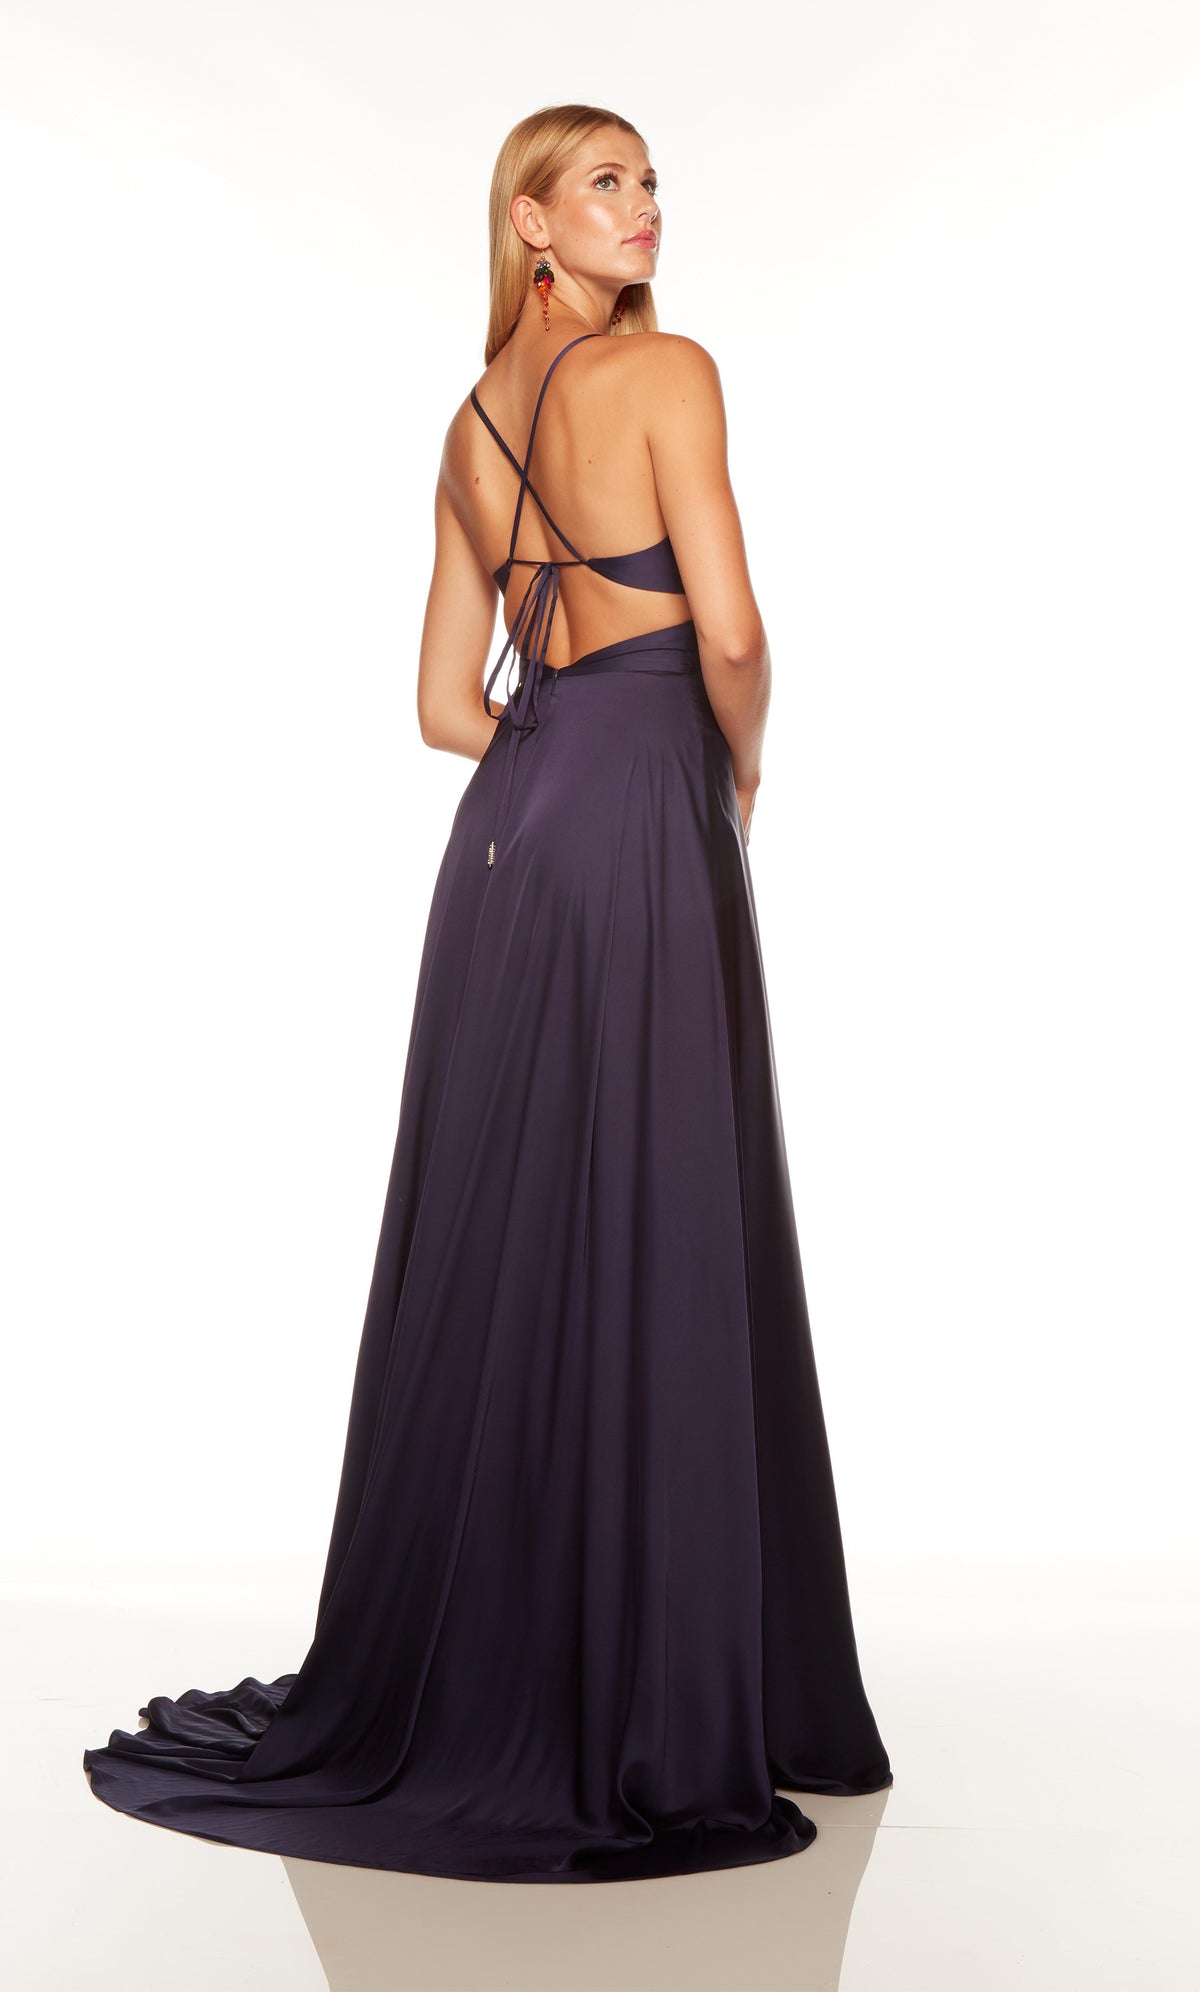 Long flowy A line gown with lace up back and train in midnight blue.